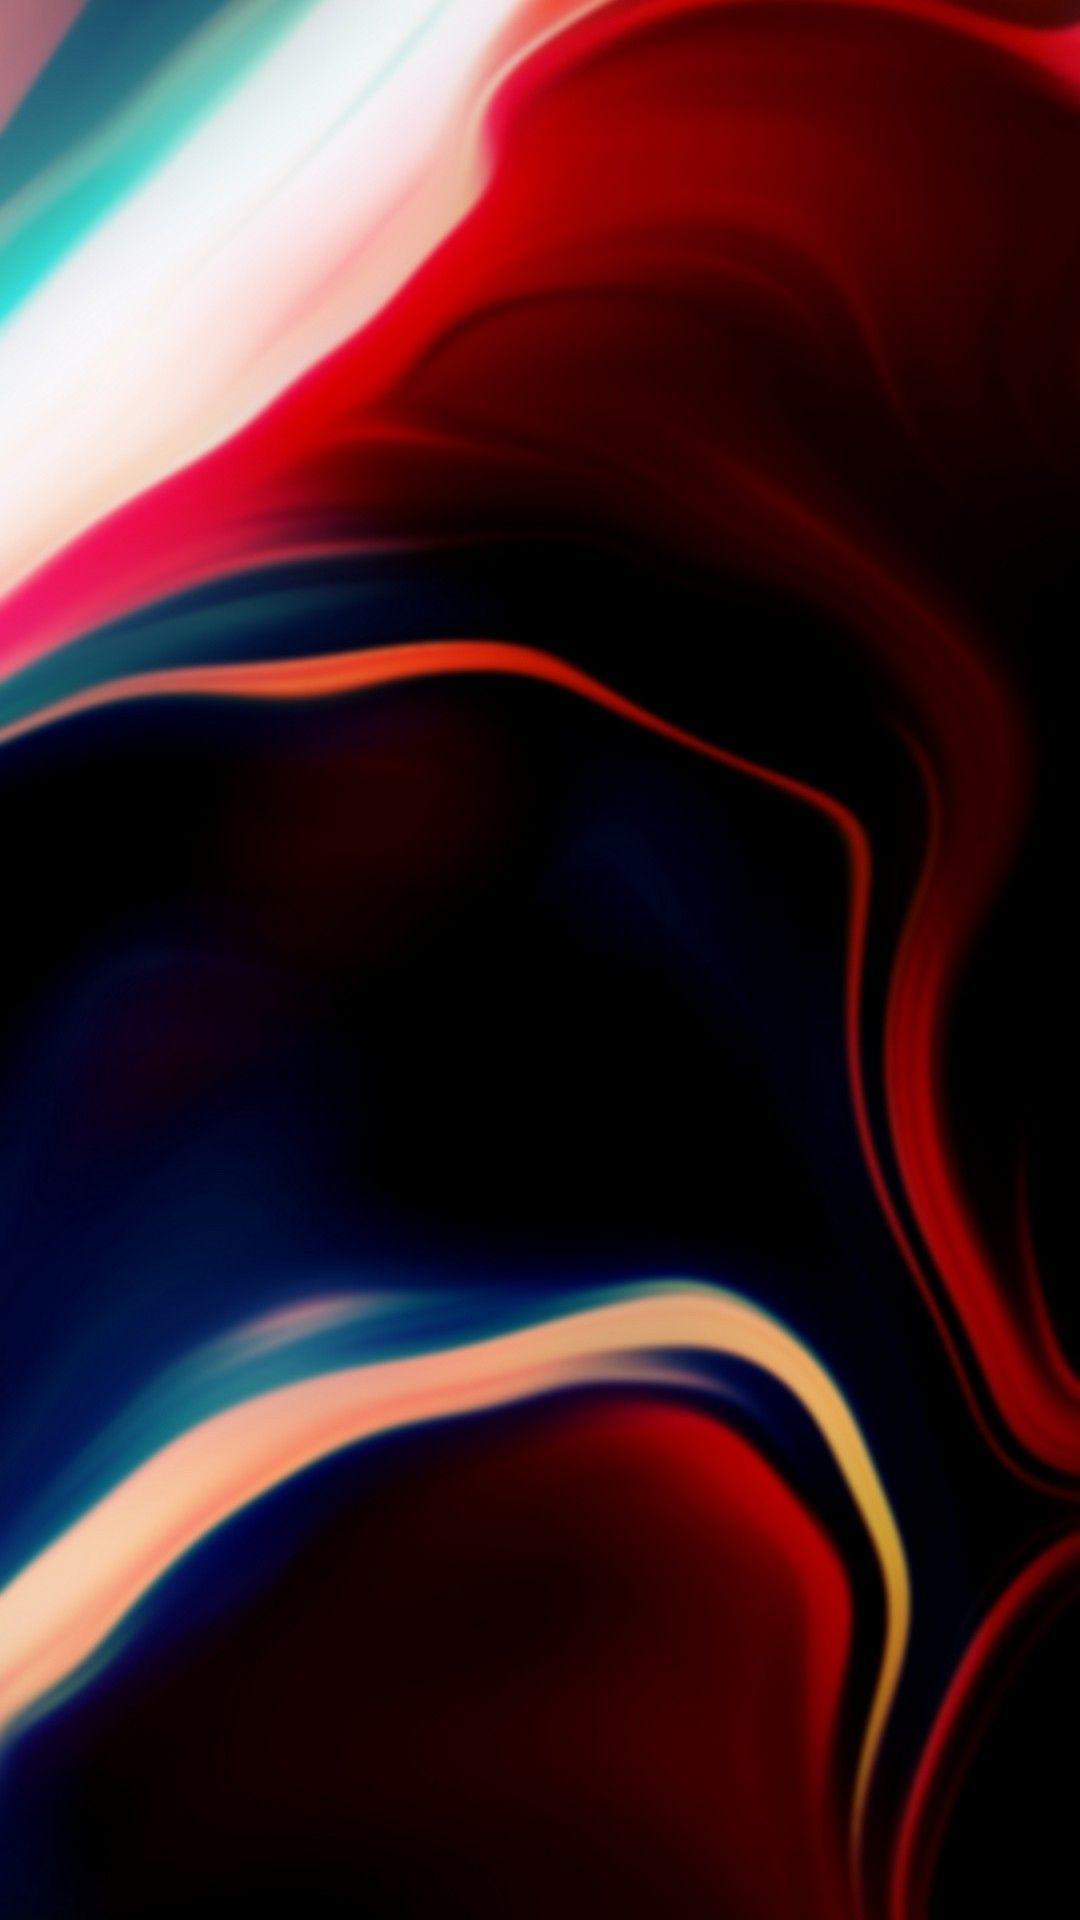 iPhone X Full HD Wallpapers - Wallpaper Cave